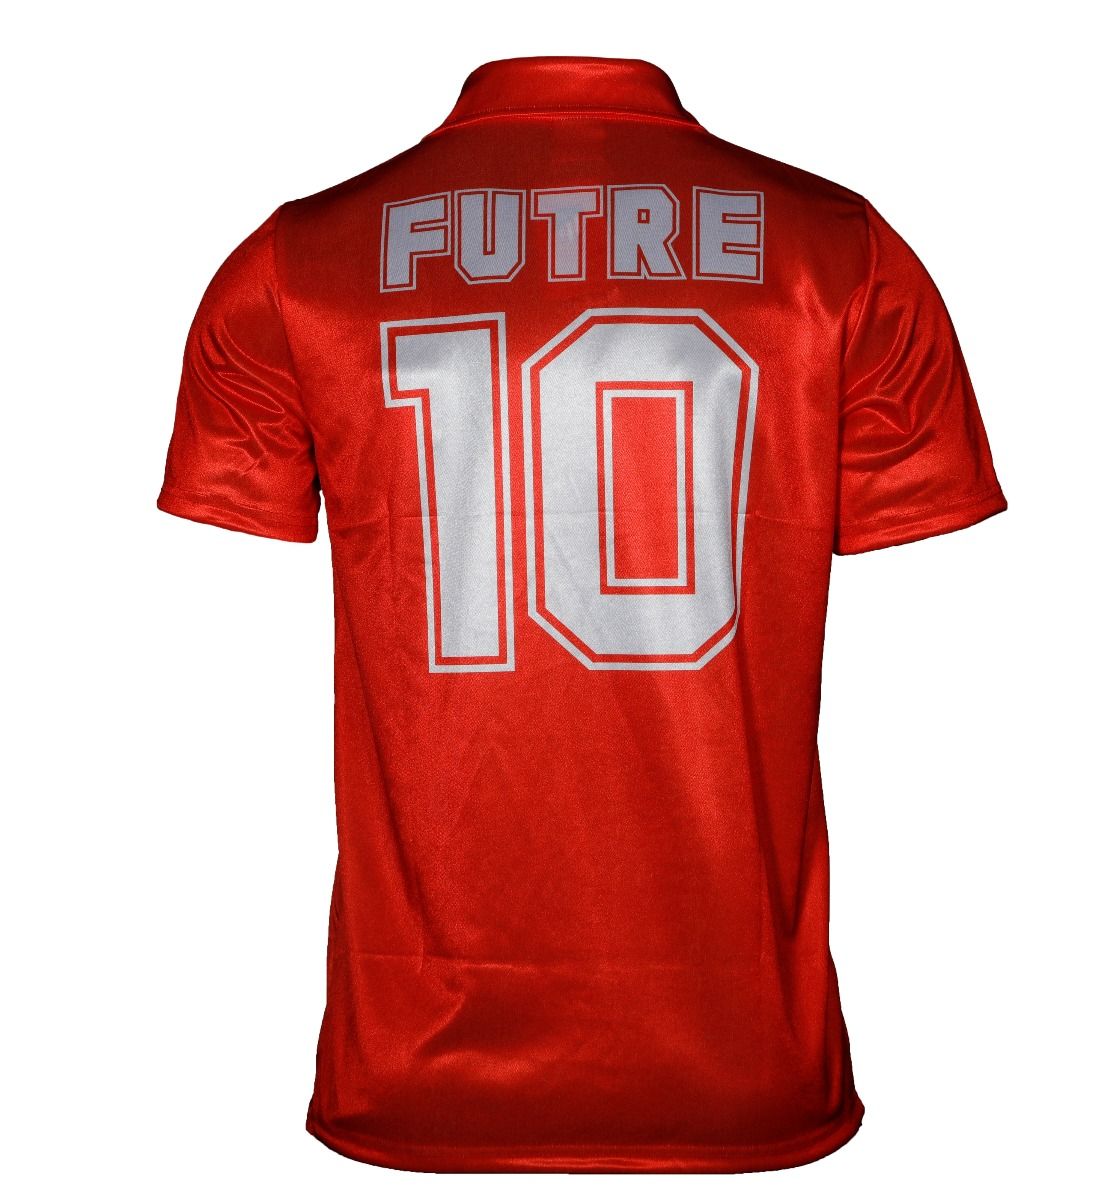 FUTRE AWAY 91/92 JERSEY image number null